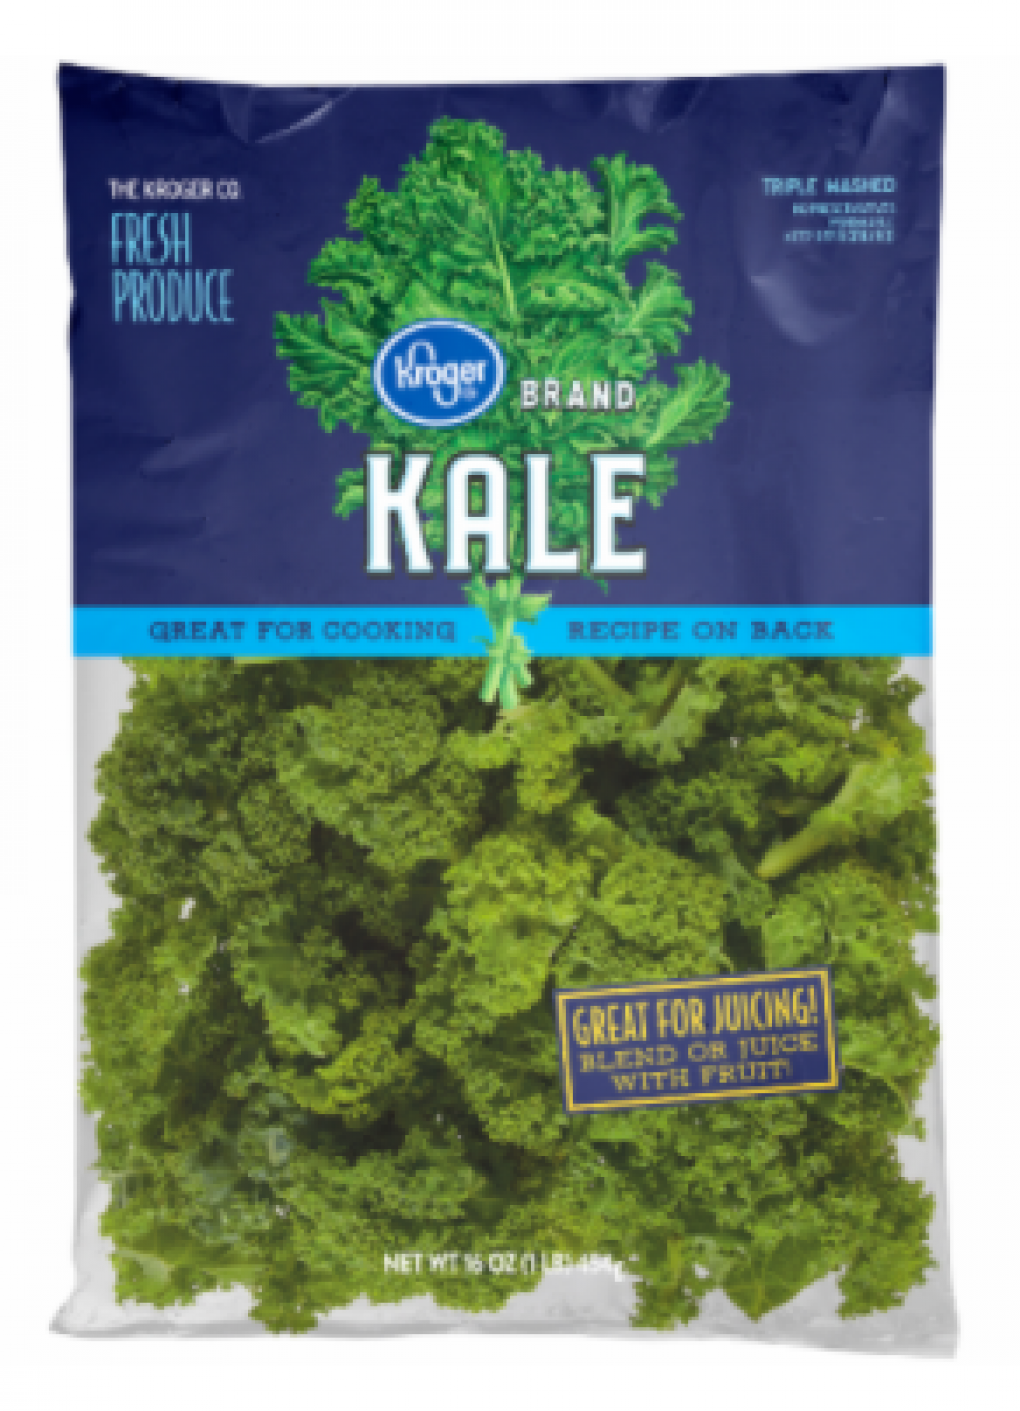 Kroger Issued a recall on Kroger Bagged Kale Due to Listeria Monocytogenes